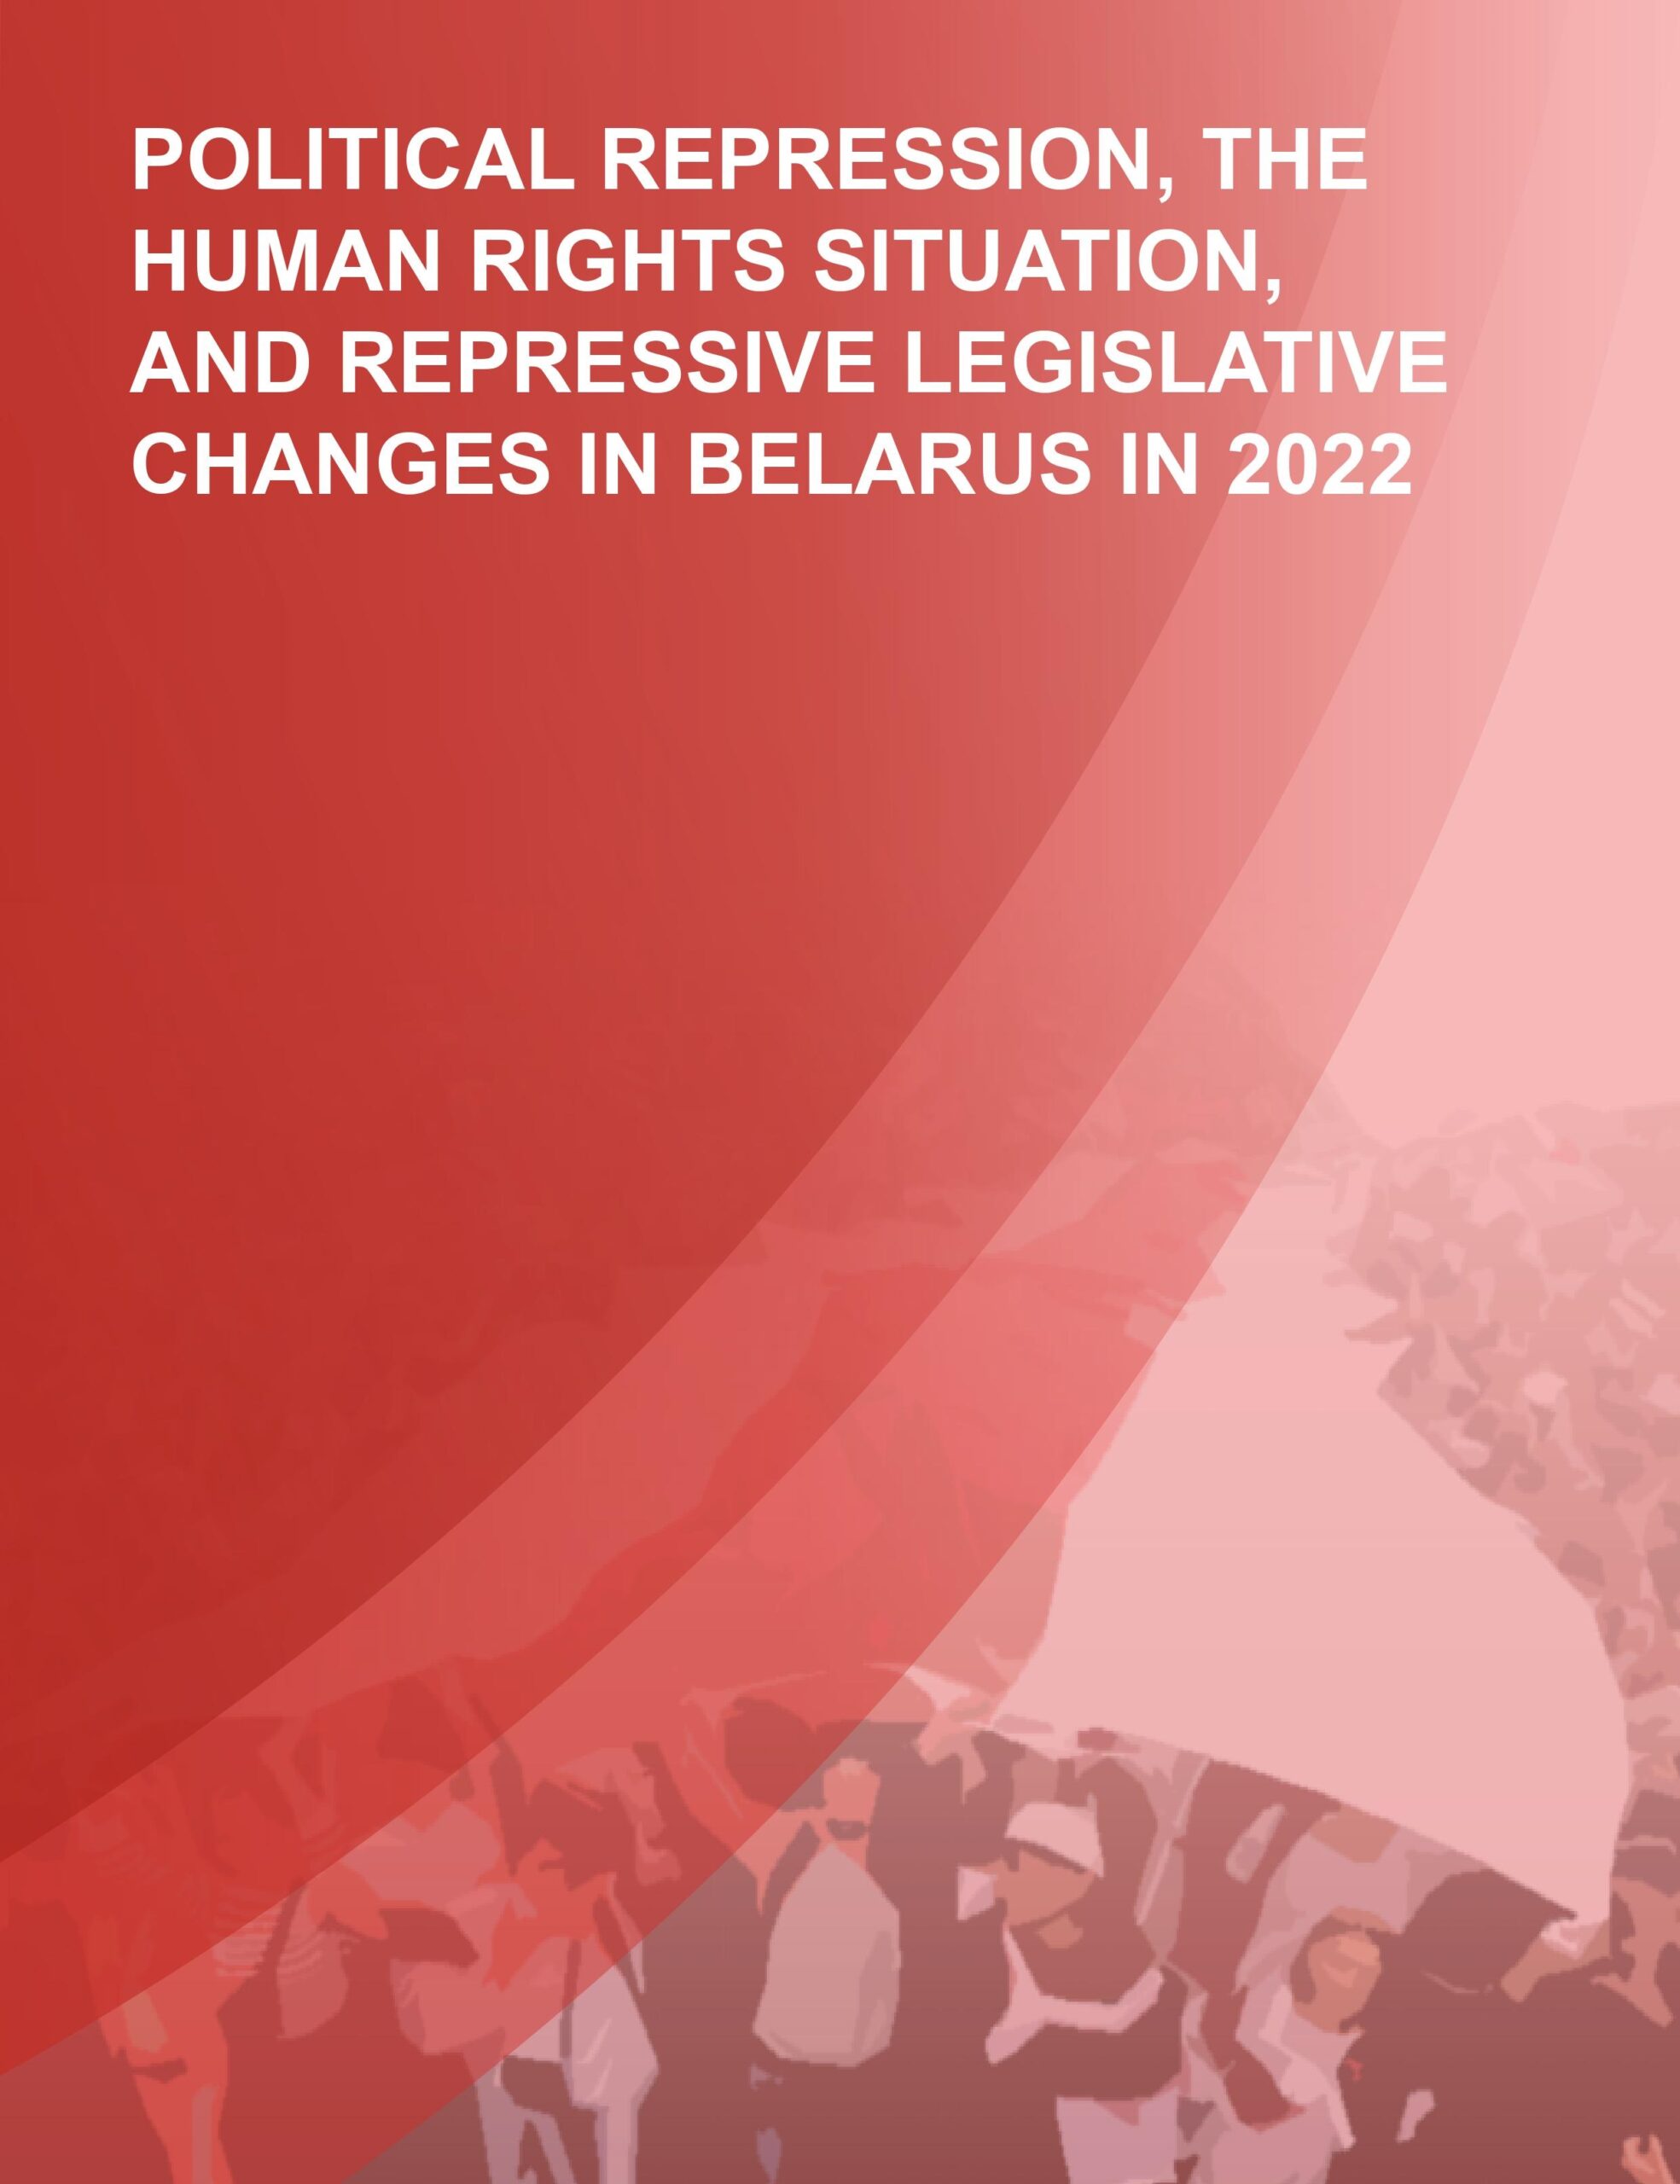 Political repression, the human rights situation, and repressive legislative changes in Belarus in 2022